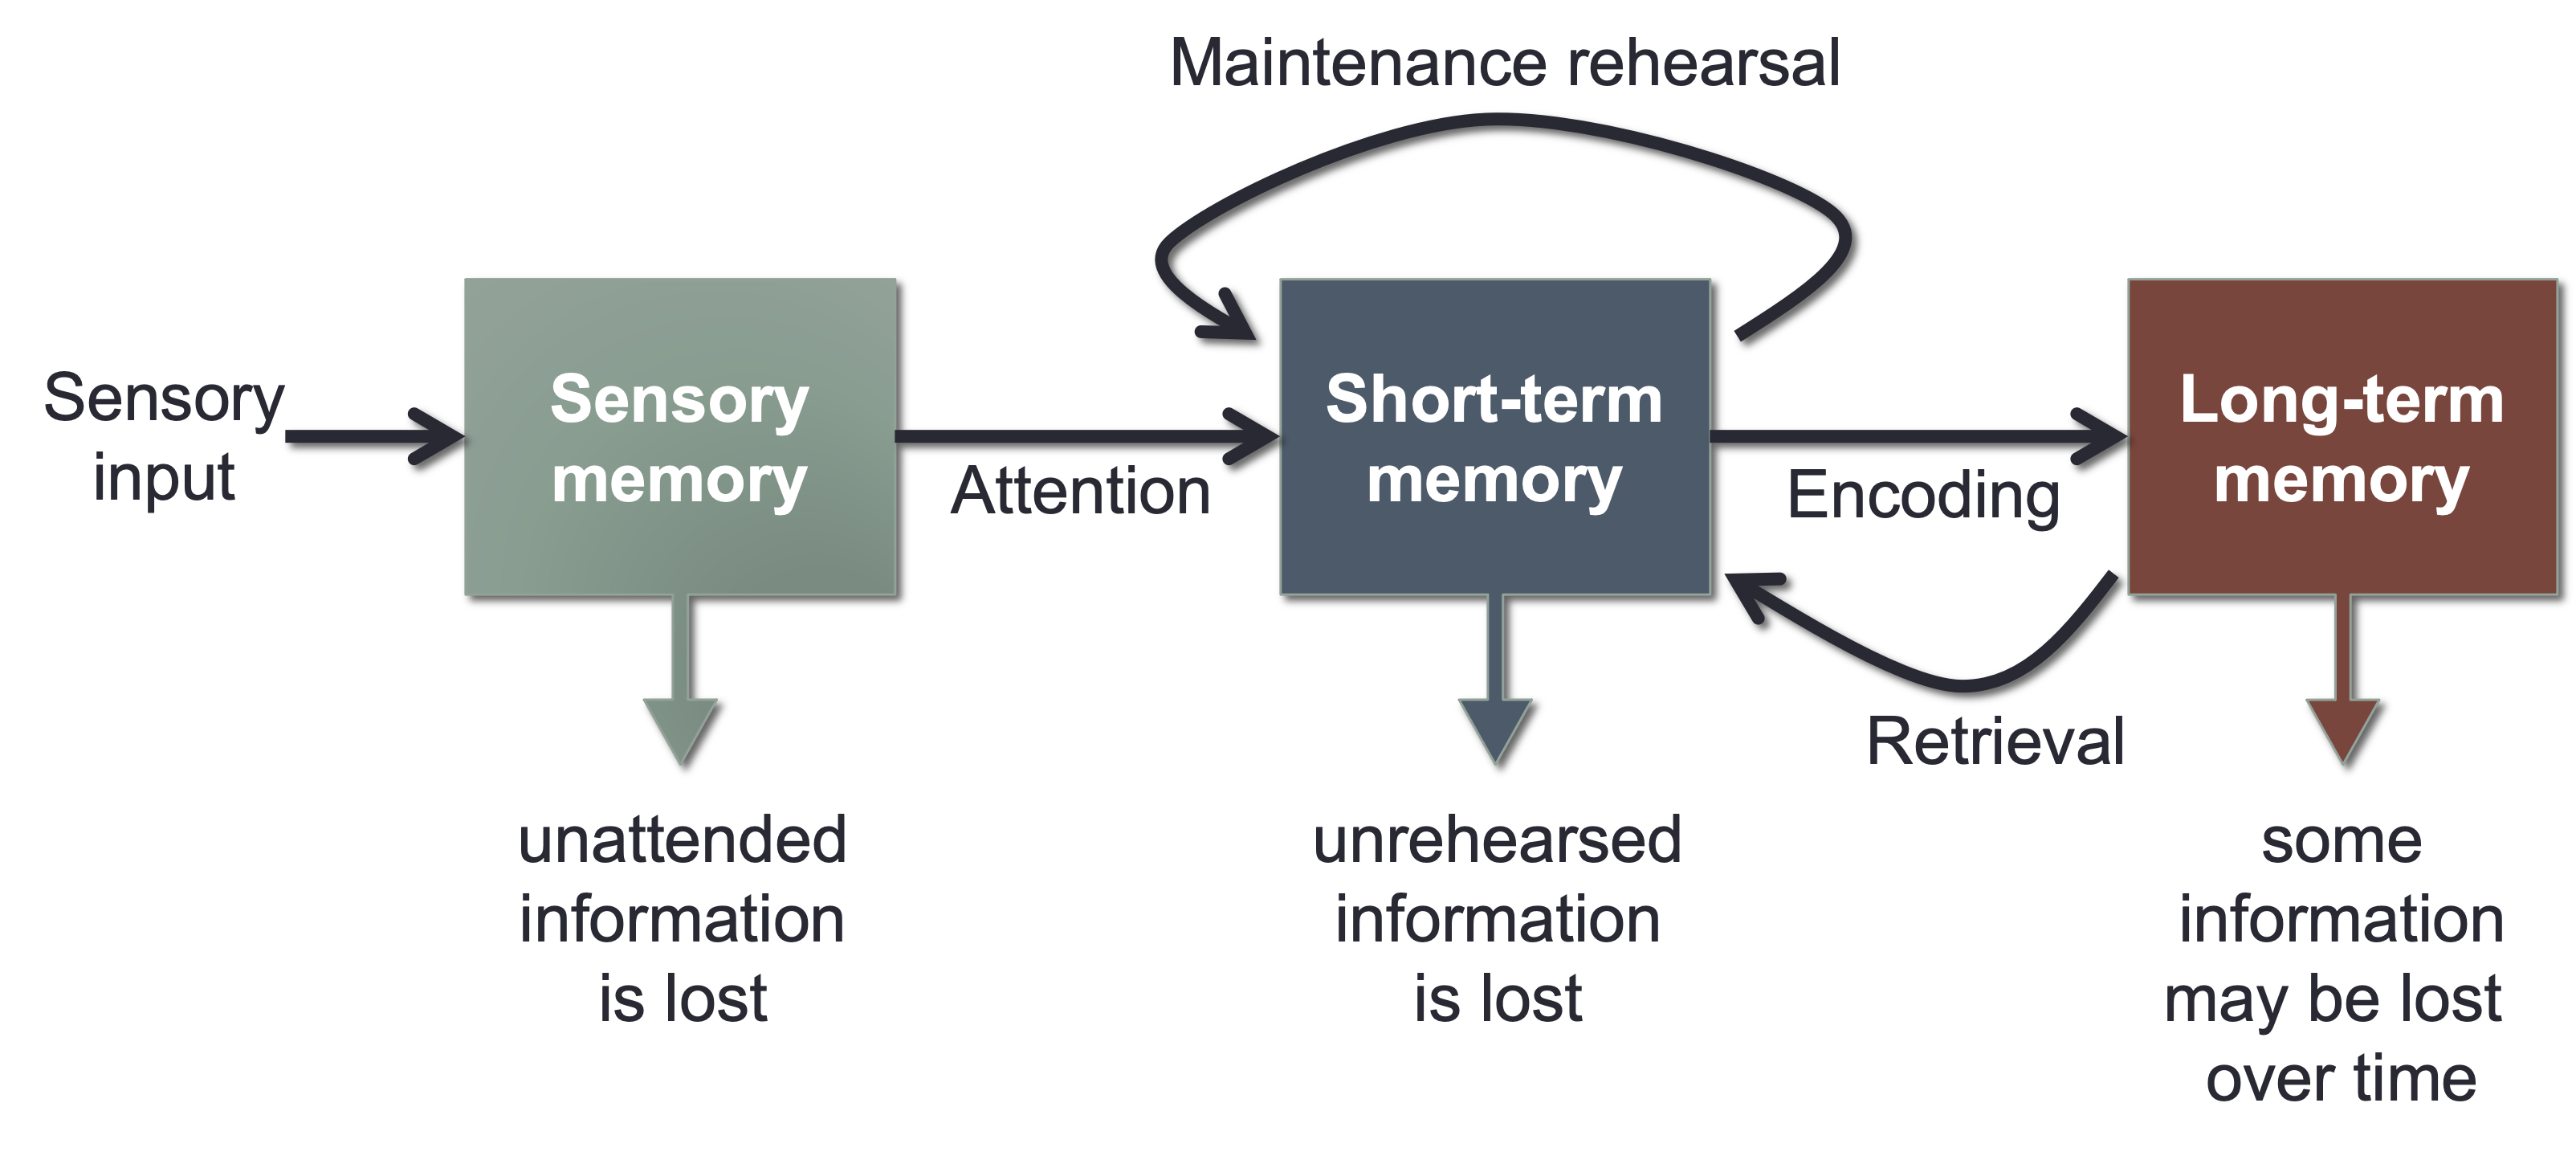 box diagram of three stages of memory (sensory, short-term, and long-term memory)